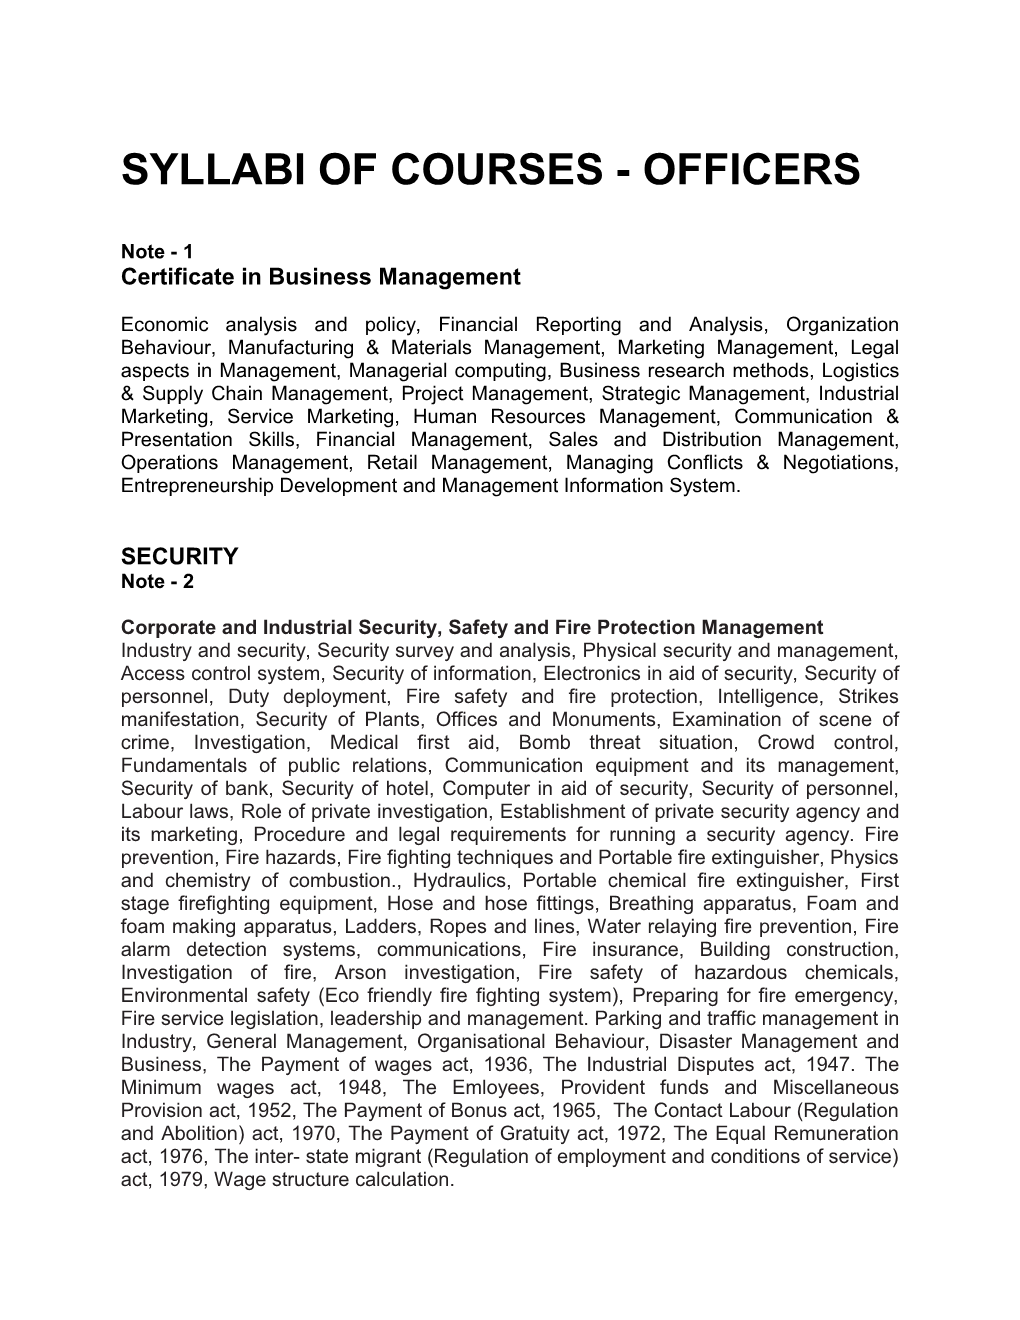 Syllabi of Courses - Officers